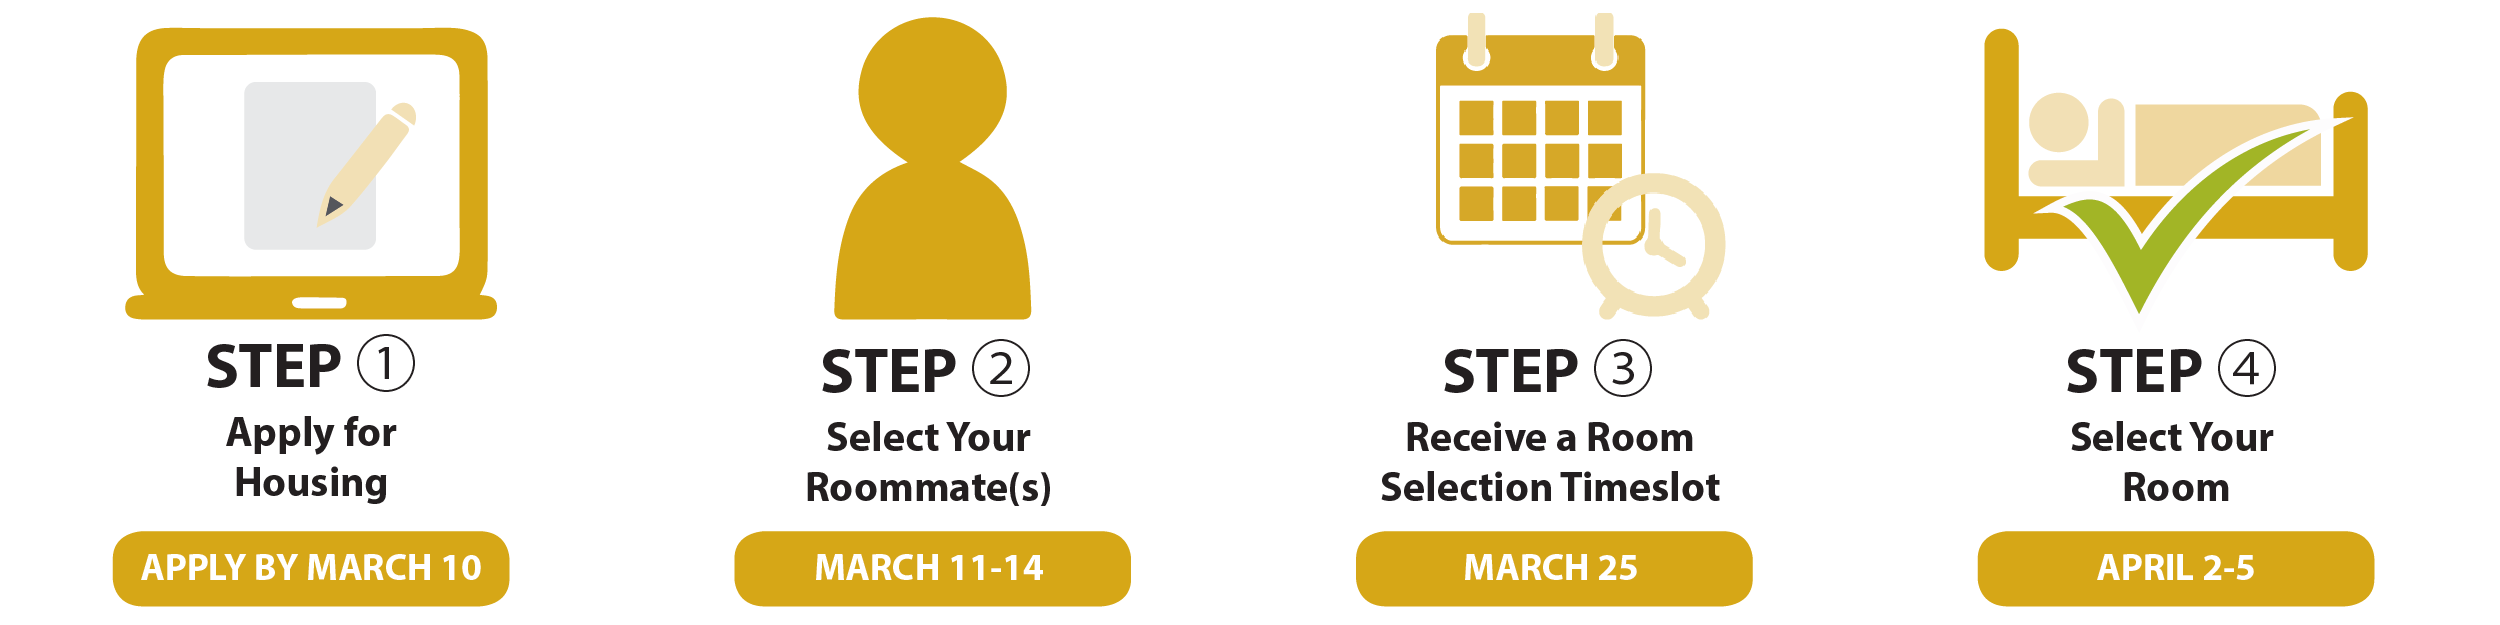 step 1 - apply for housing by March 10, step 2 select your roommate(s) March 11-14, Step 3 Receive a room selection timeslot - March 25, Step 4 - select your room April 2-5